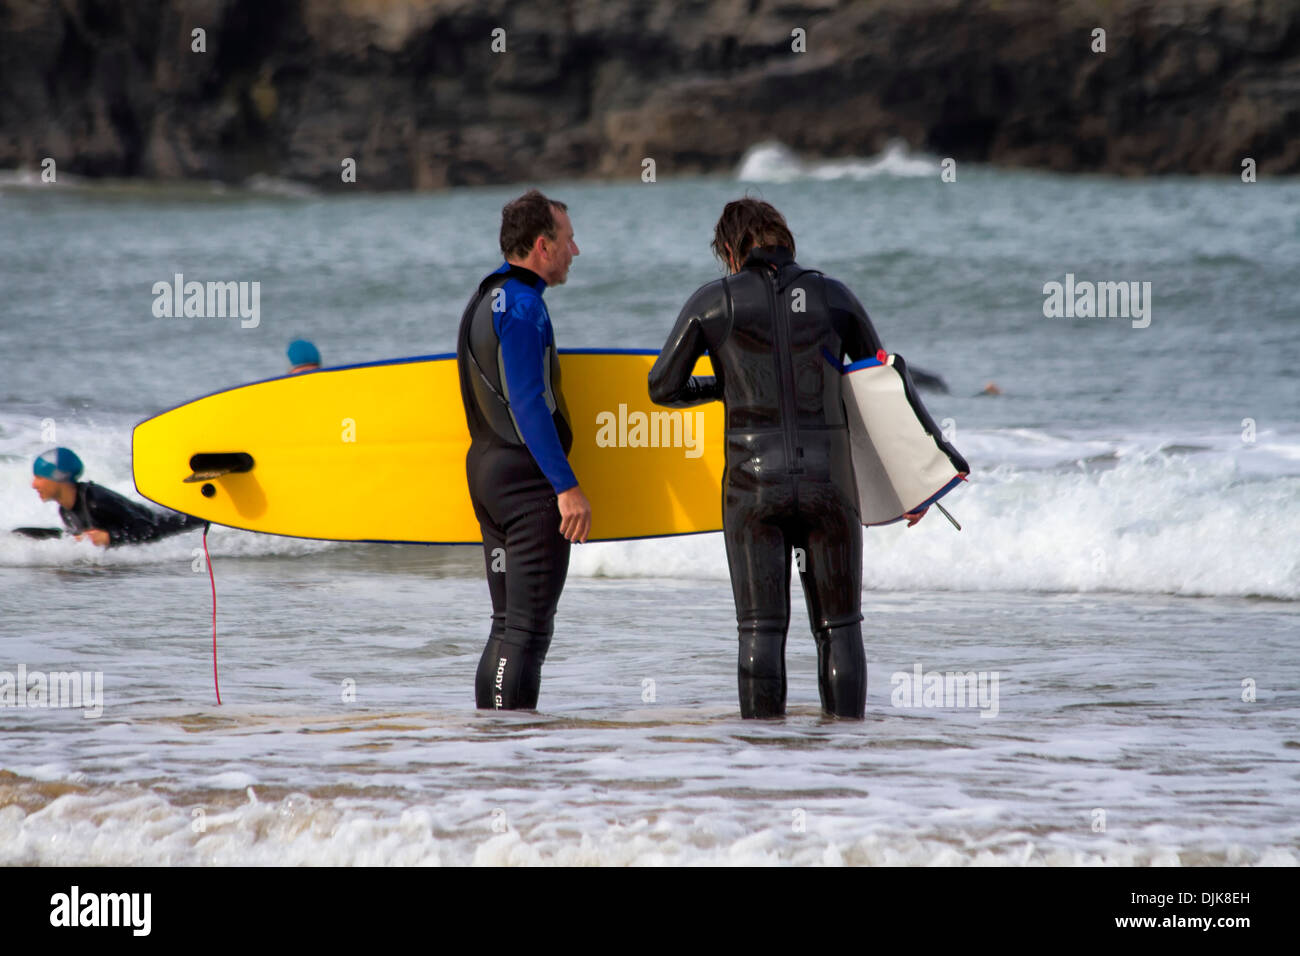 Two surfers with surfboards standing at the shoreline, Harlyn Bay, Cornwall, England Stock Photo